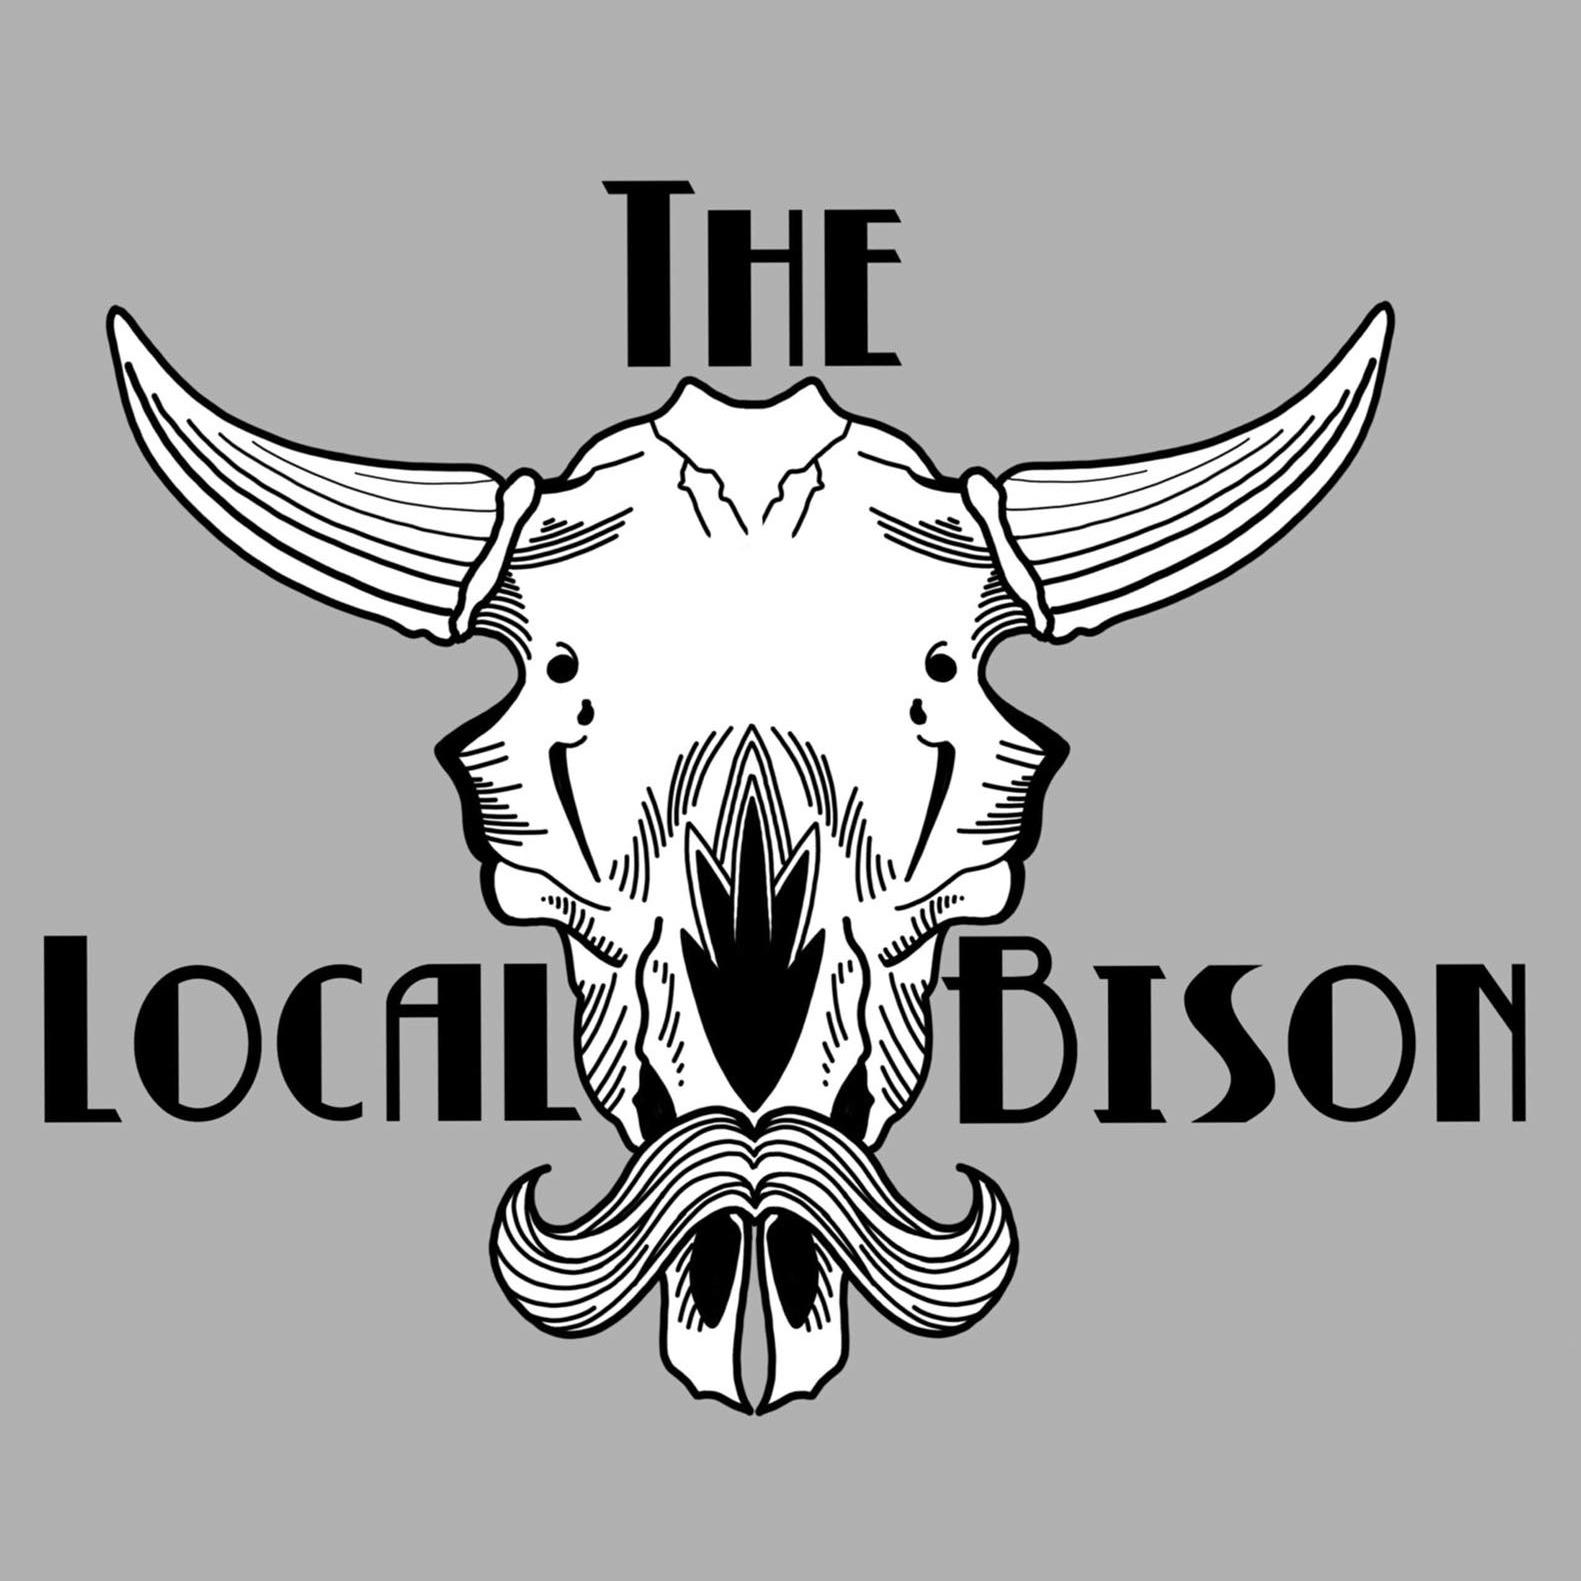 The Local Bison Logo